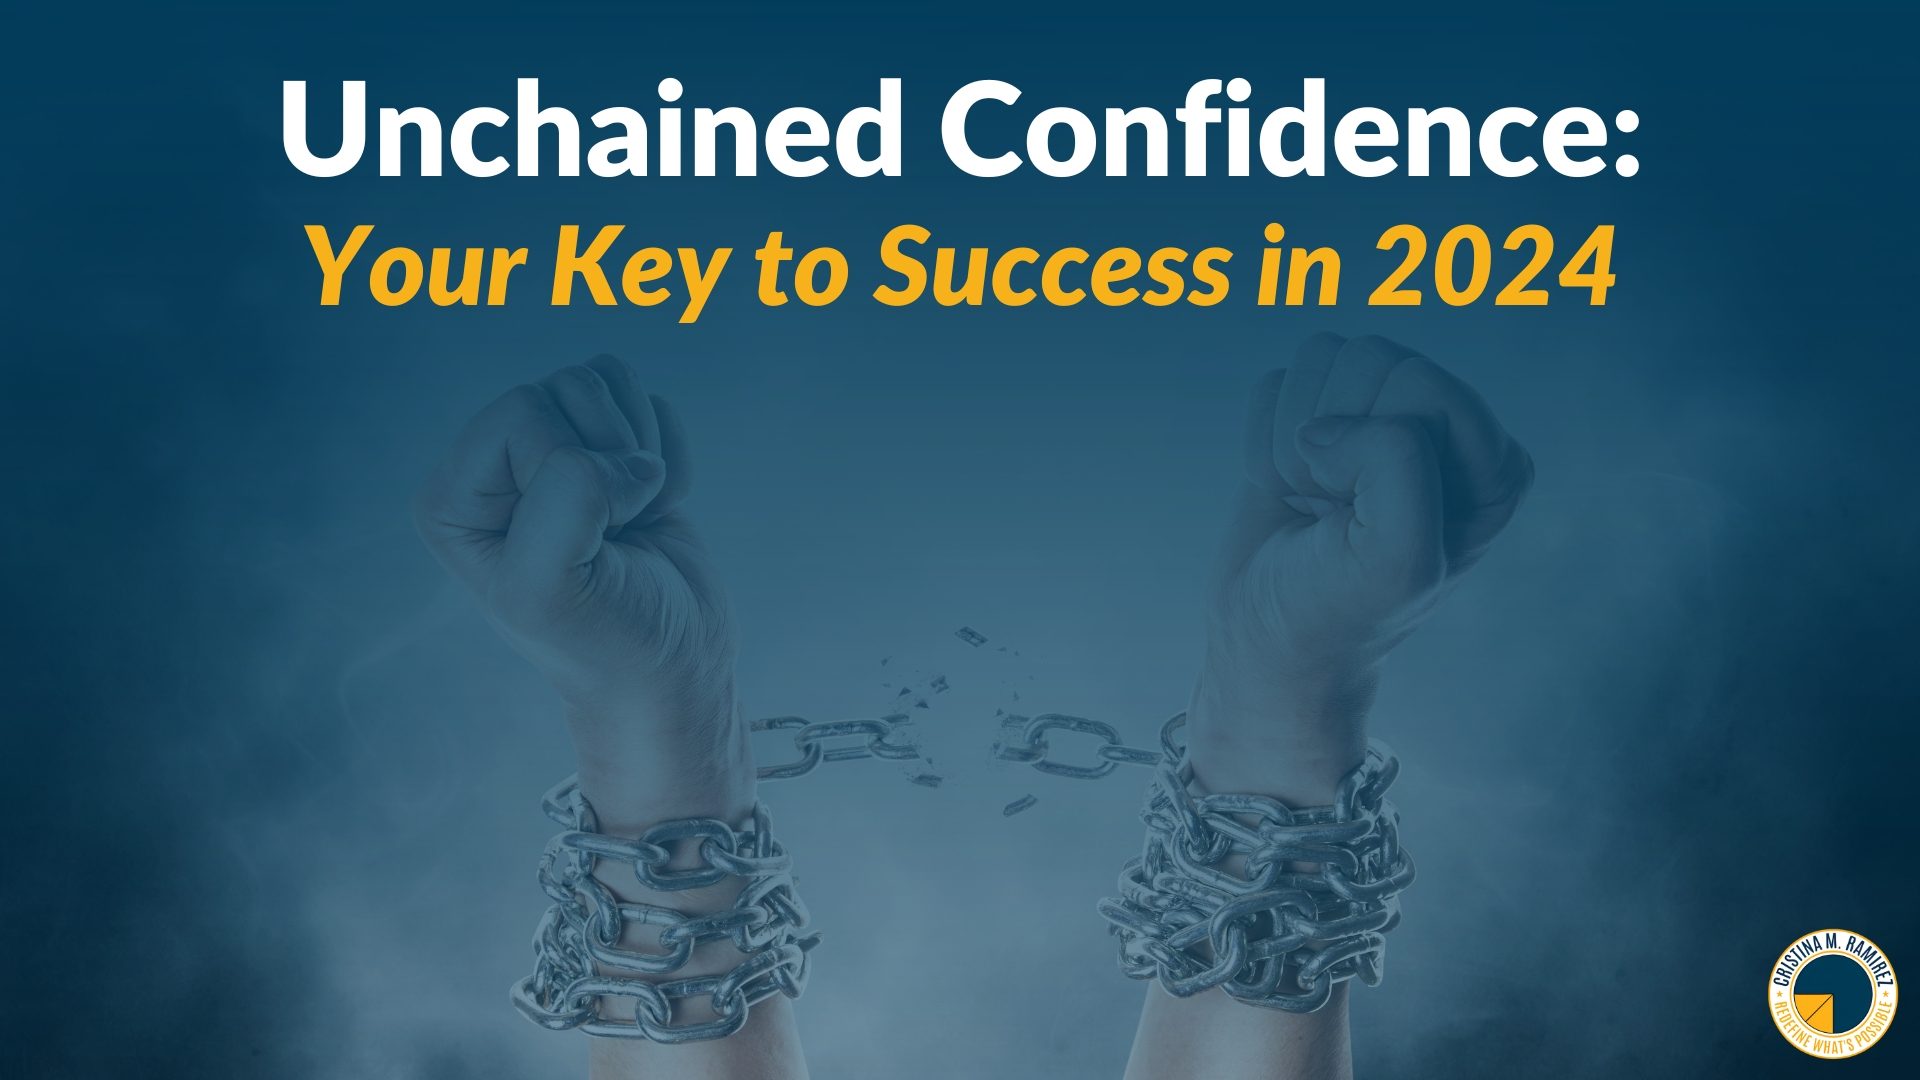 Unchained Confidence: Your Key to Success in 2024